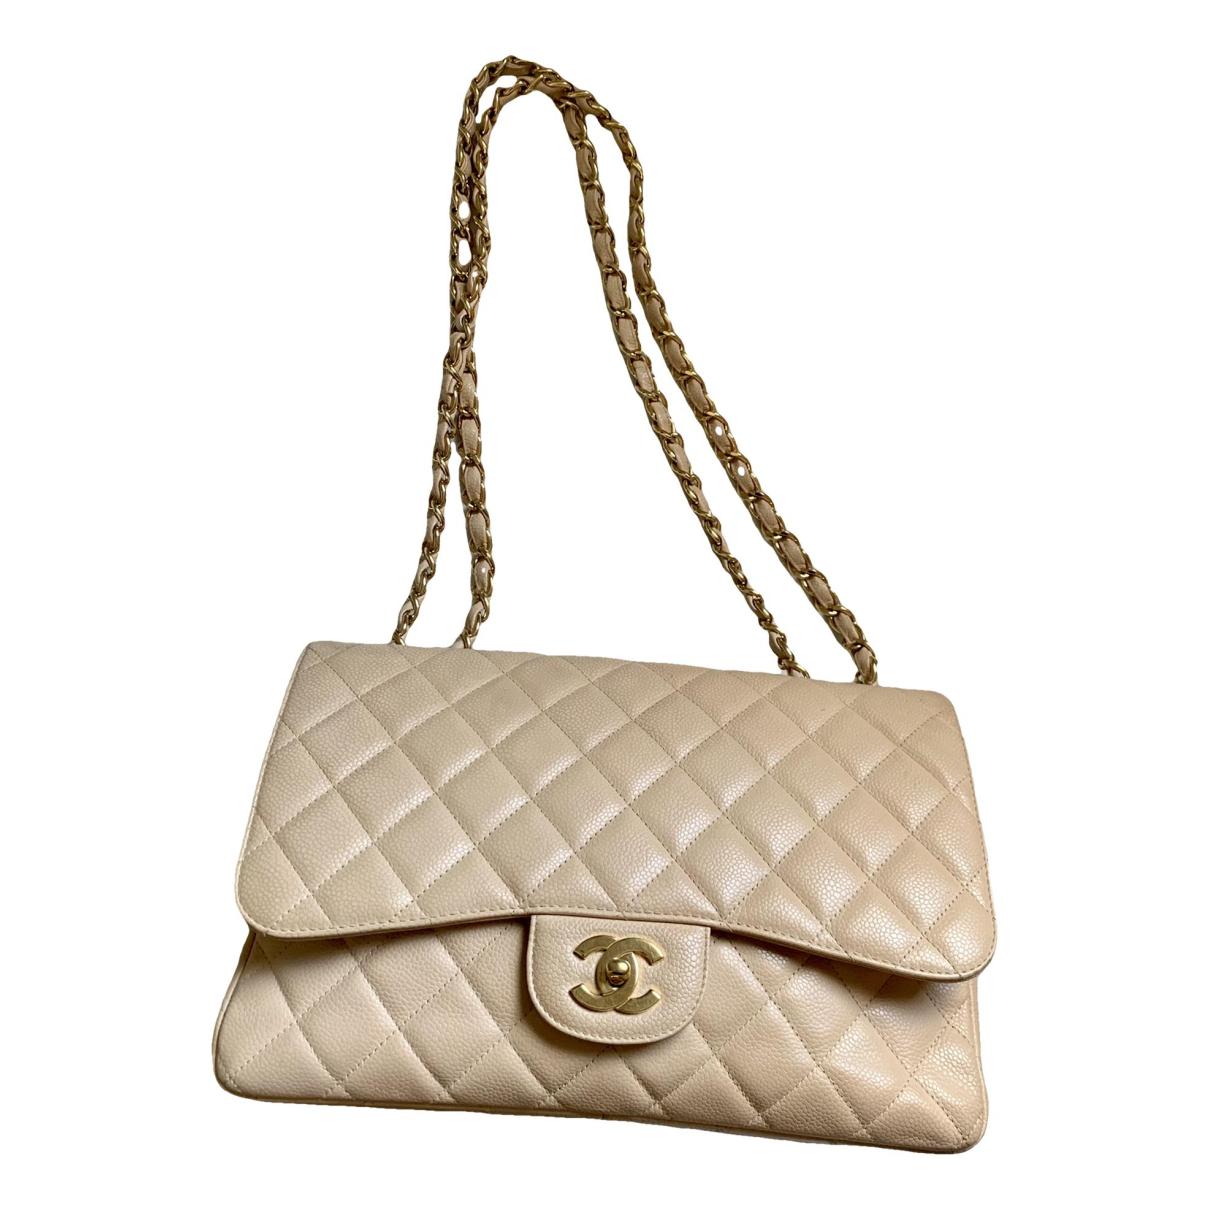 Timeless/classique leather crossbody bag Chanel Beige in Leather - 37302617